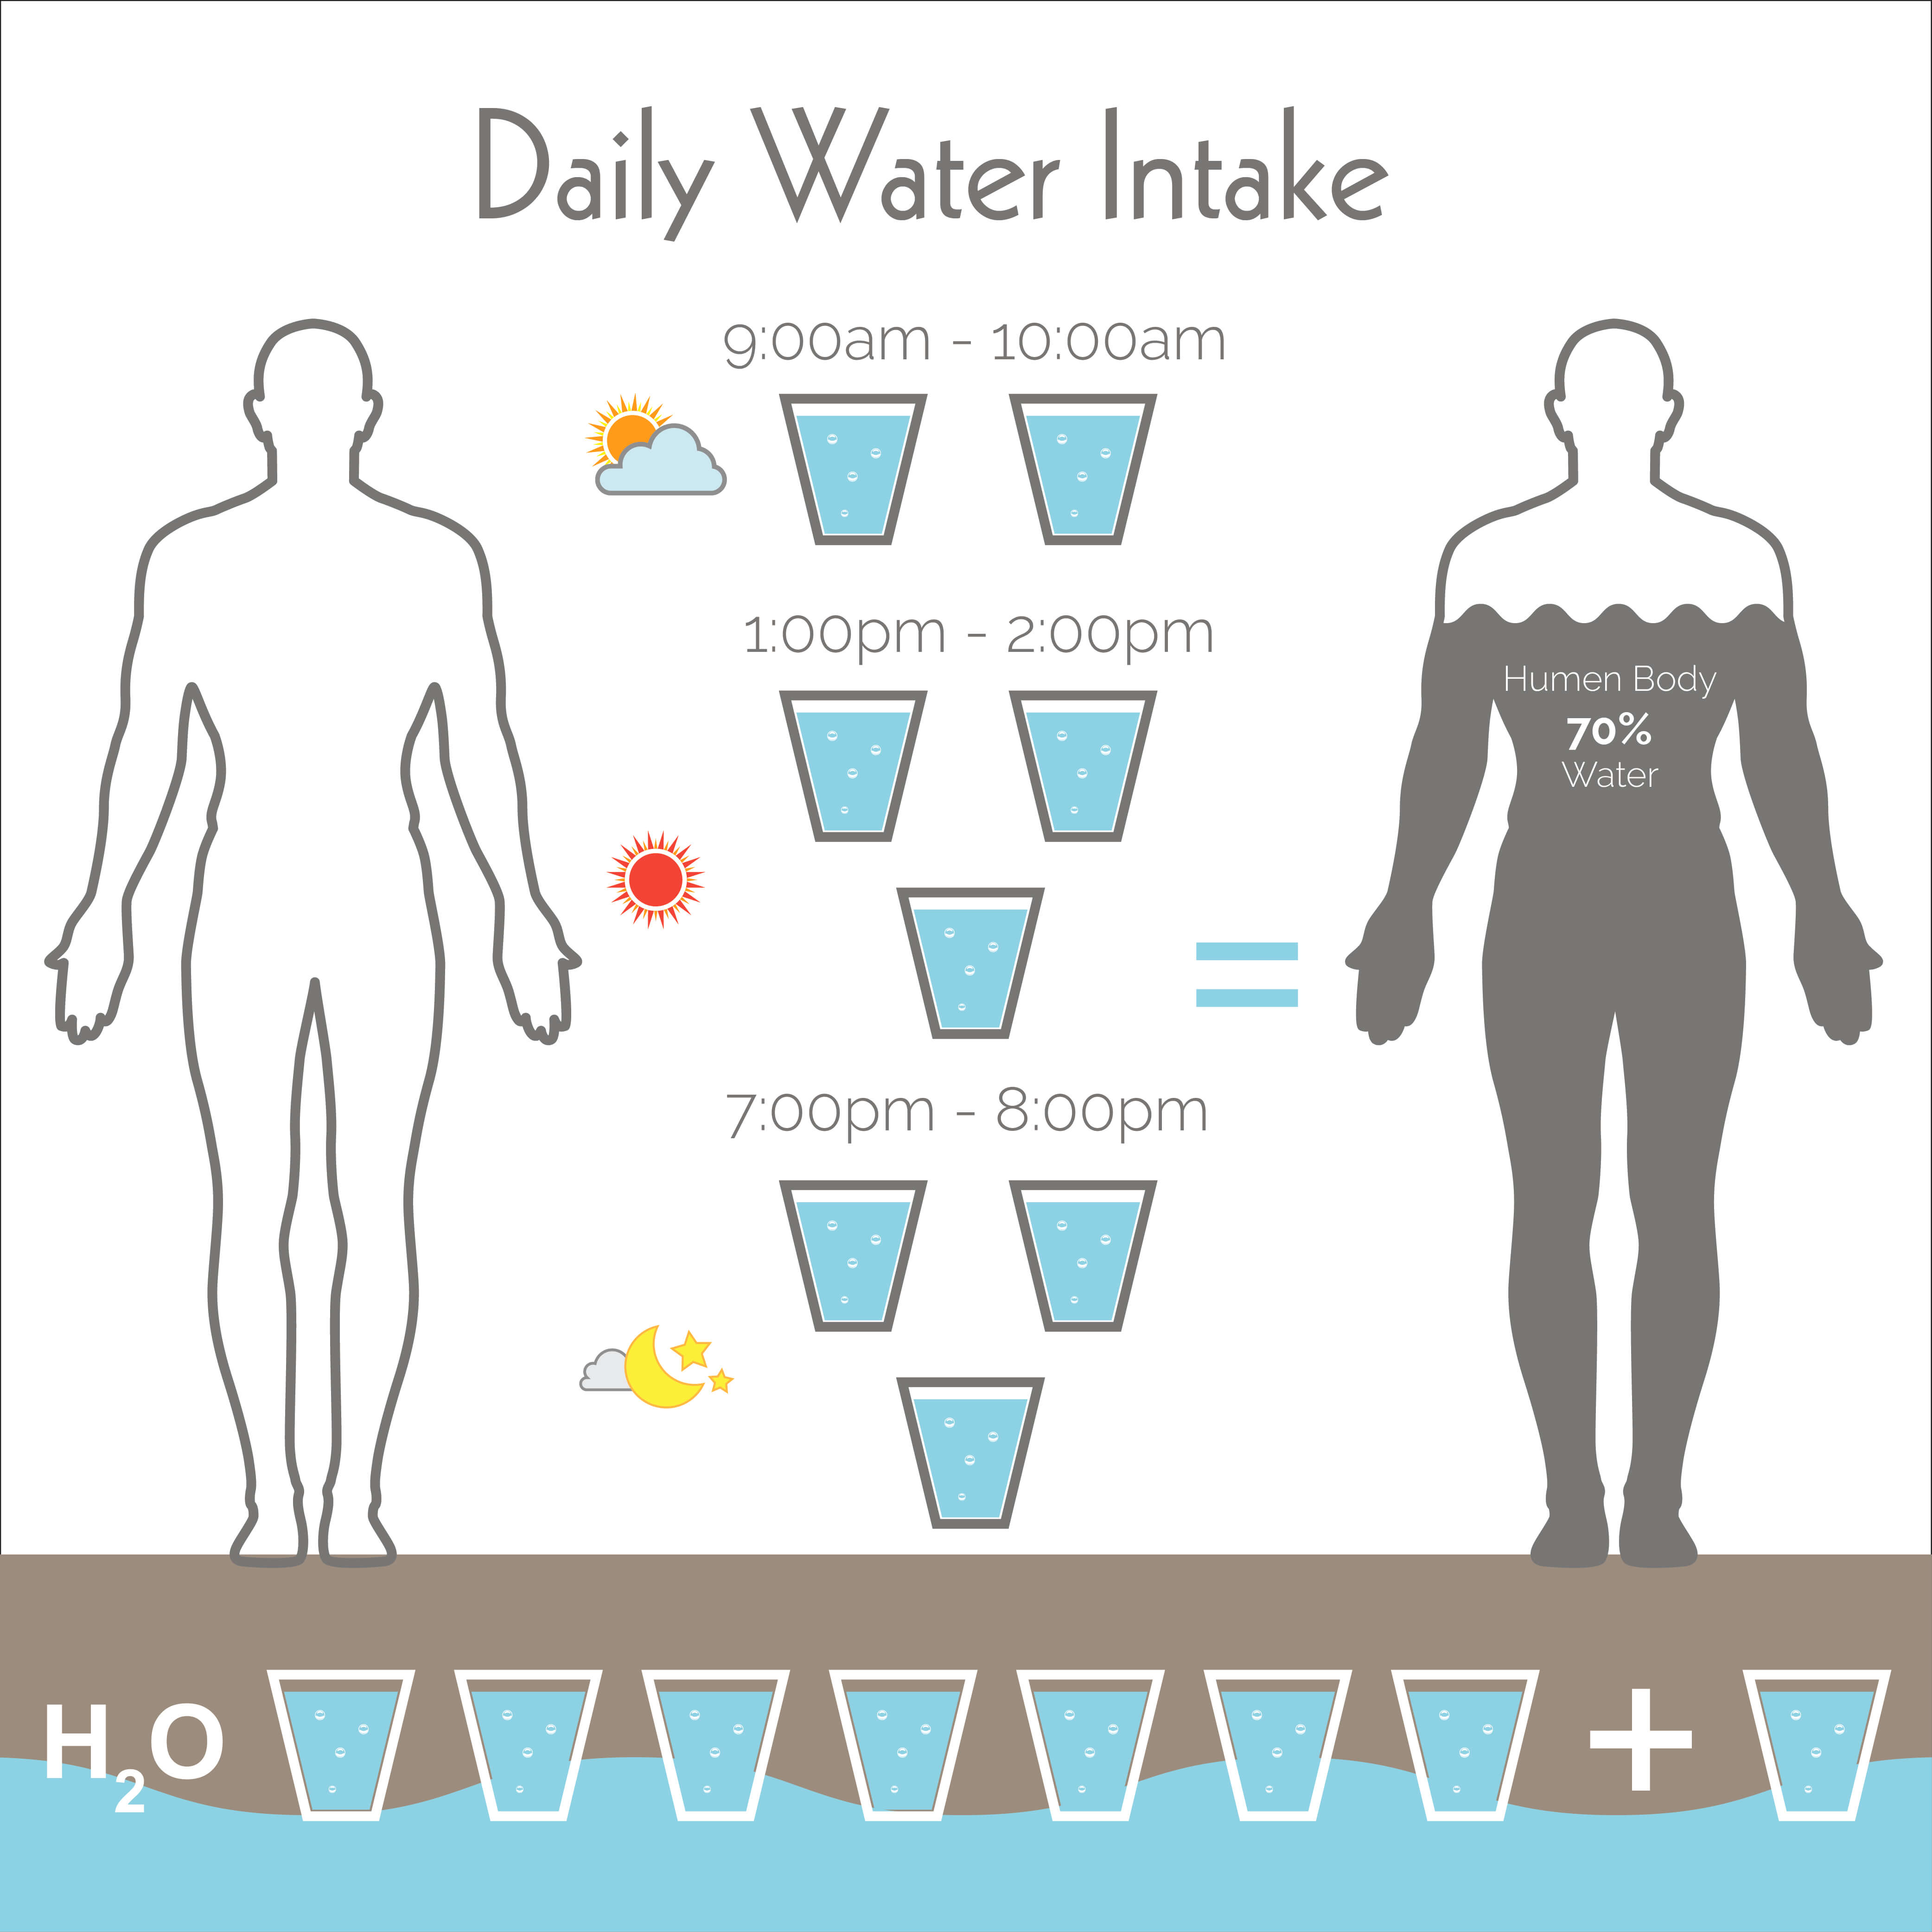 Infographic on daily water intake